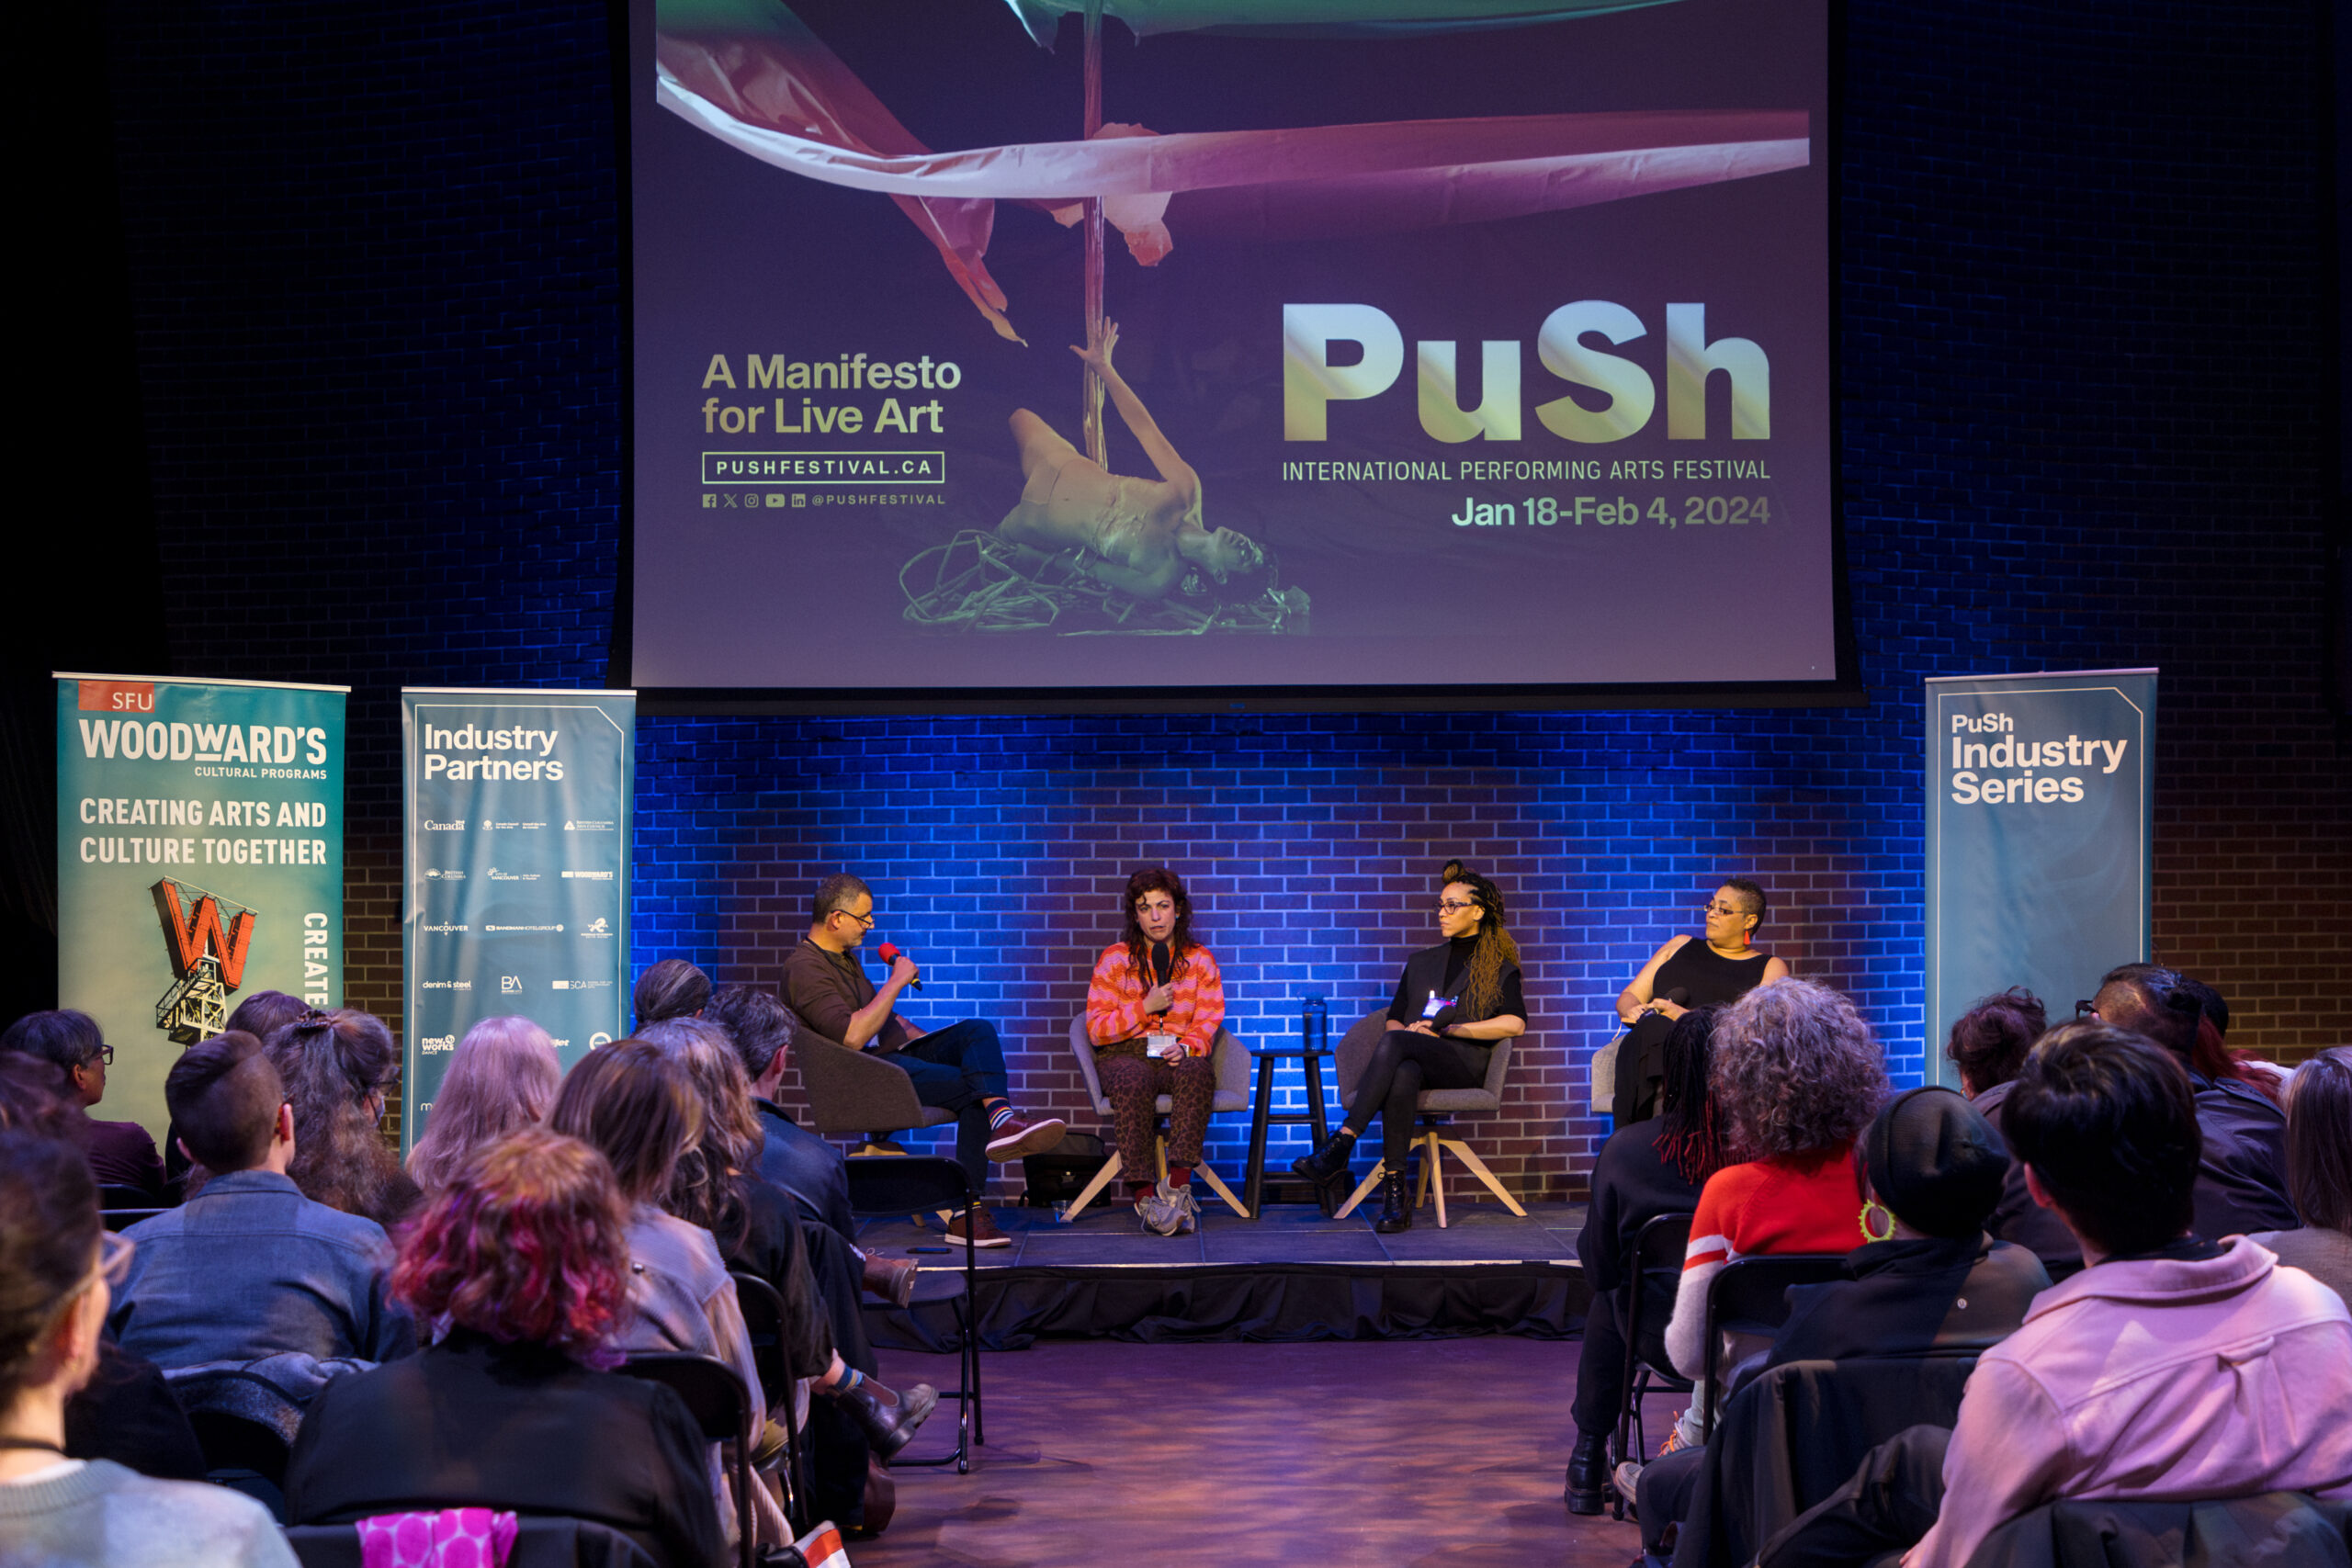 Highlights of a Growing Industry Series - PuSh Festival